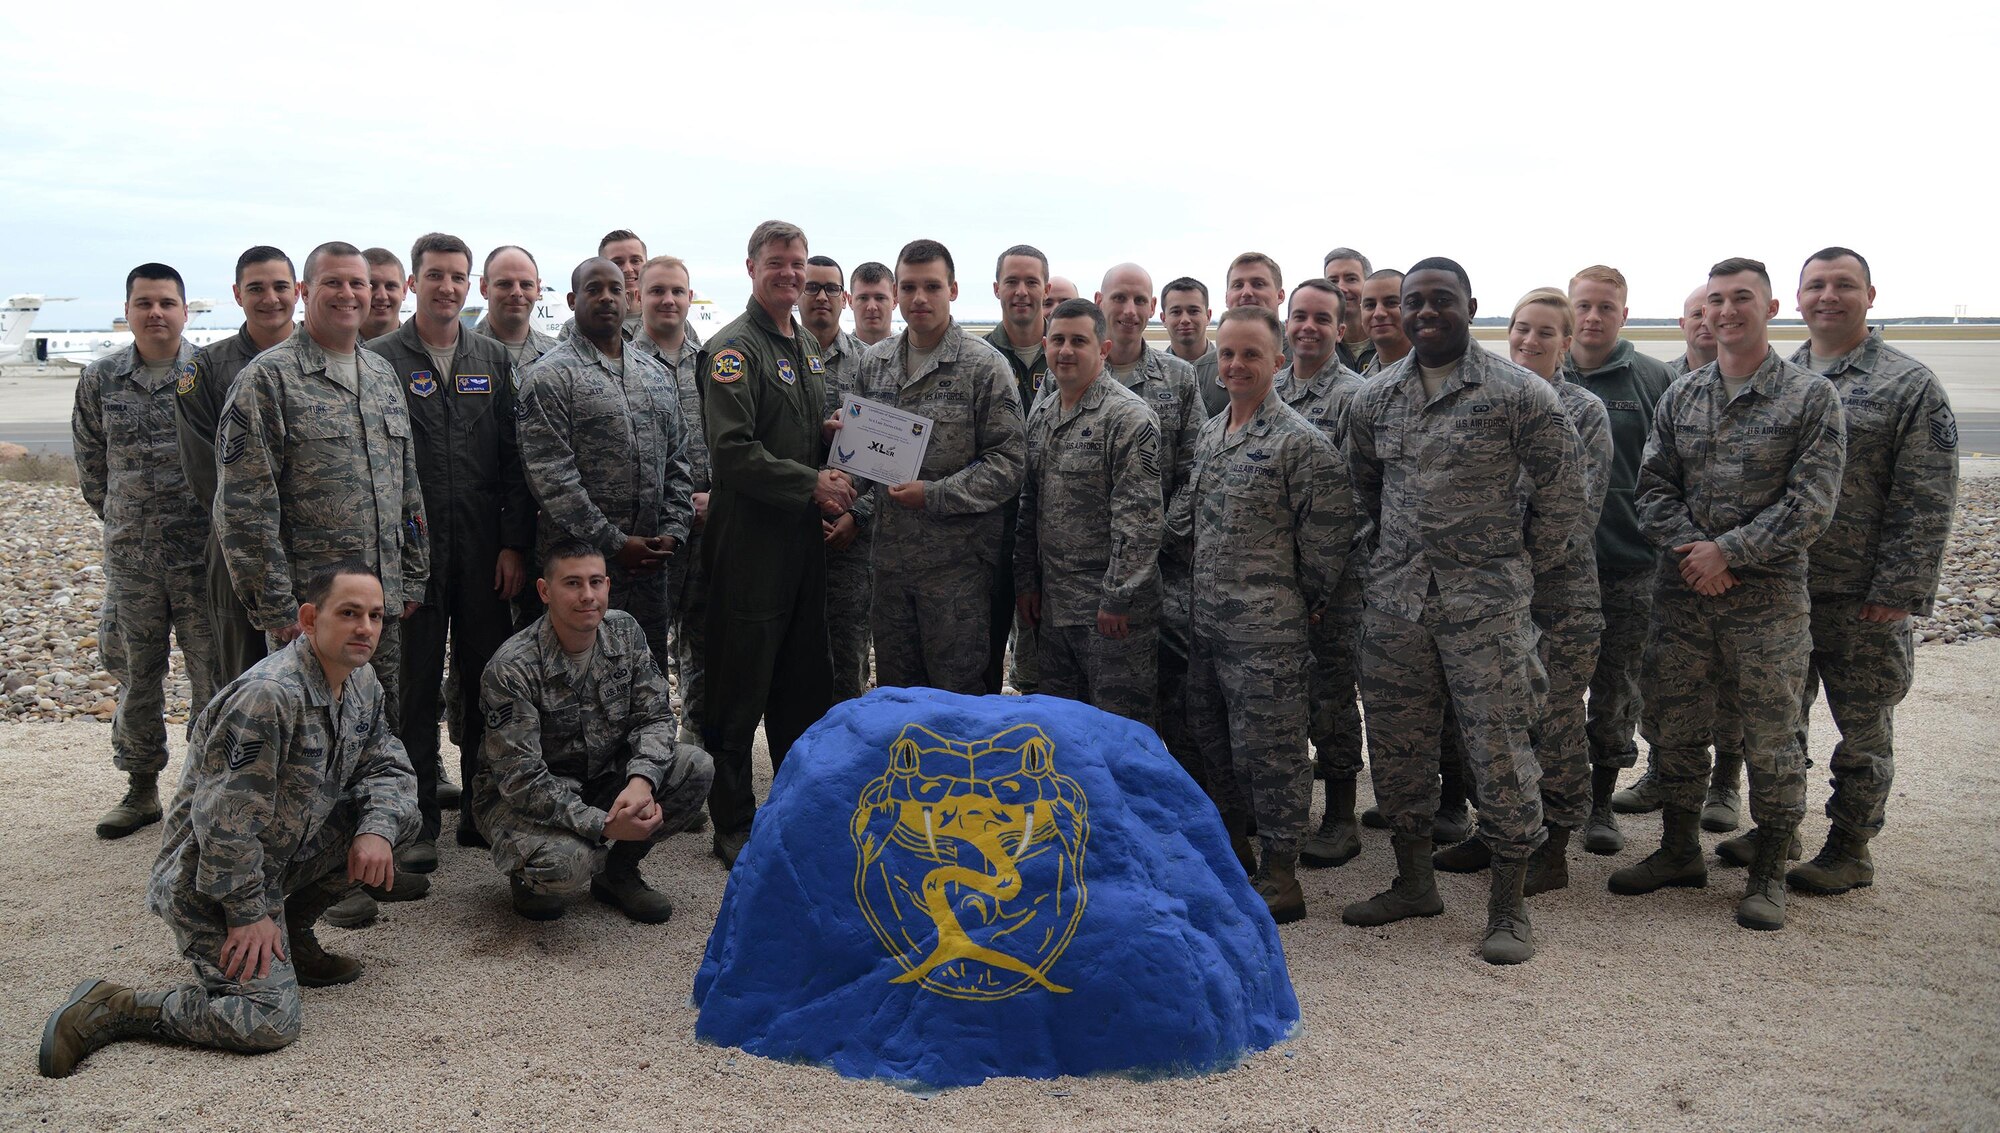 Senior Airman Luis Torres-Ortiz, 47th Operations Support Squadron aircrew flight equipment journeyman (front center), accepts the “XLer of the Week” award from Col. Thomas Shank, 47th Flying Training Wing commander (front left), and Chief Master Sgt. George Richey, 47th FTW command chief (front right), on Laughlin Air Force Base, Texas, Jan. 3, 2017. The XLer is a weekly award chosen by wing leadership and is presented to those who consistently make outstanding contributions to their unit and Laughlin. (U.S. Air Force photo/Senior Airman Ariel Partlow)